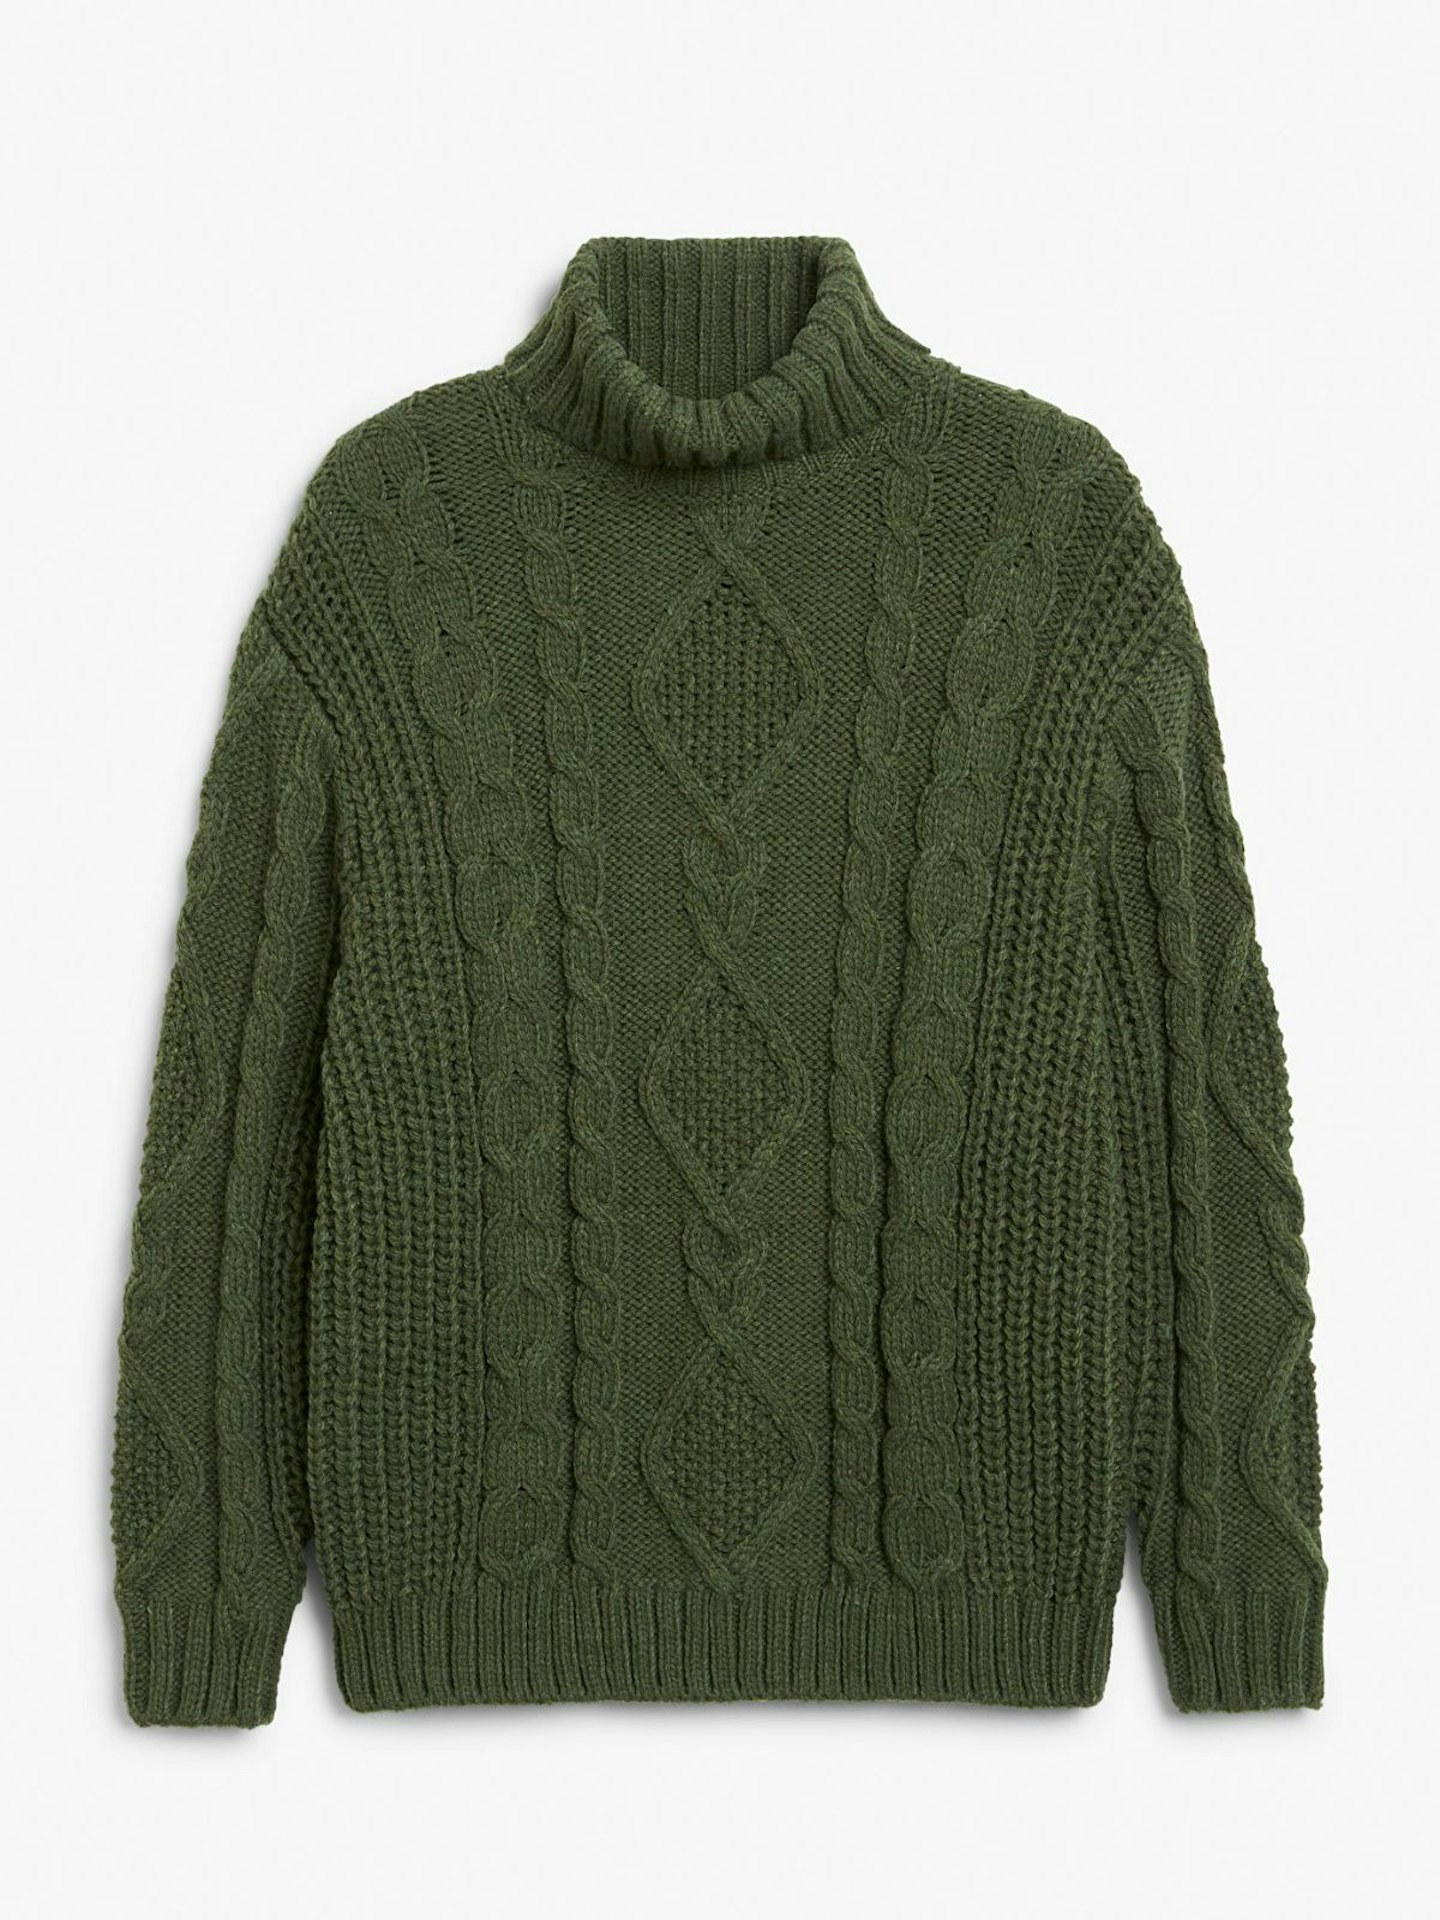 Knit Claudia Winkleman's jumper on The Traitors with this kit